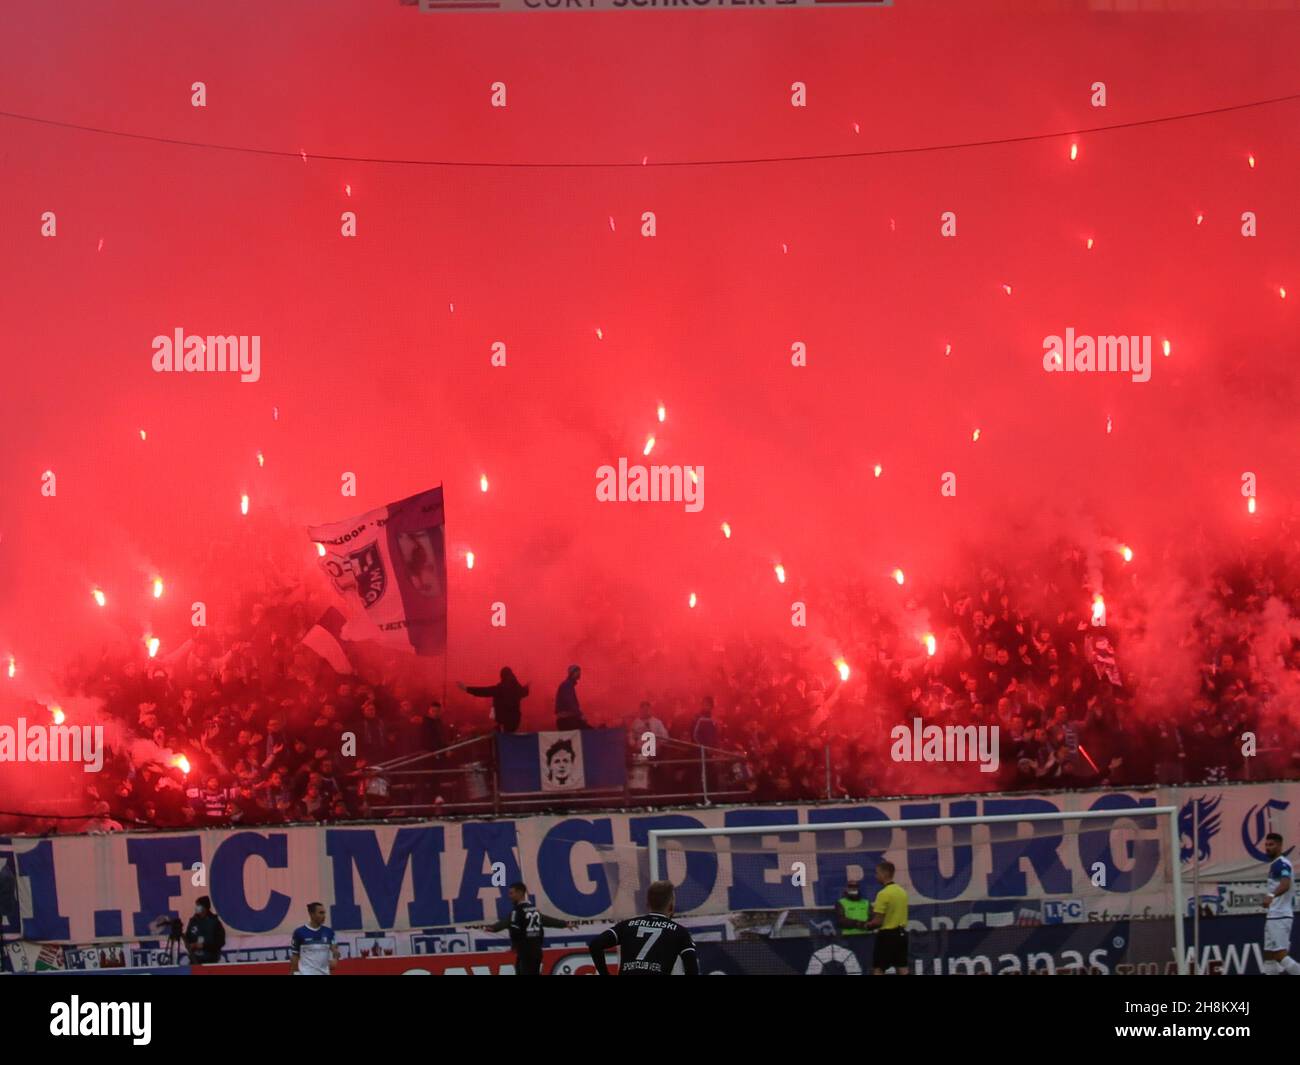 Pyro In Block U Fans Of 1.FC Magdeburg In The Game 1. FC Magdeburg Vs. SC Verl DFB Soccer 15th Matchday 3rd League Season 2021-2022 On November 7th, 2 Stock Photo